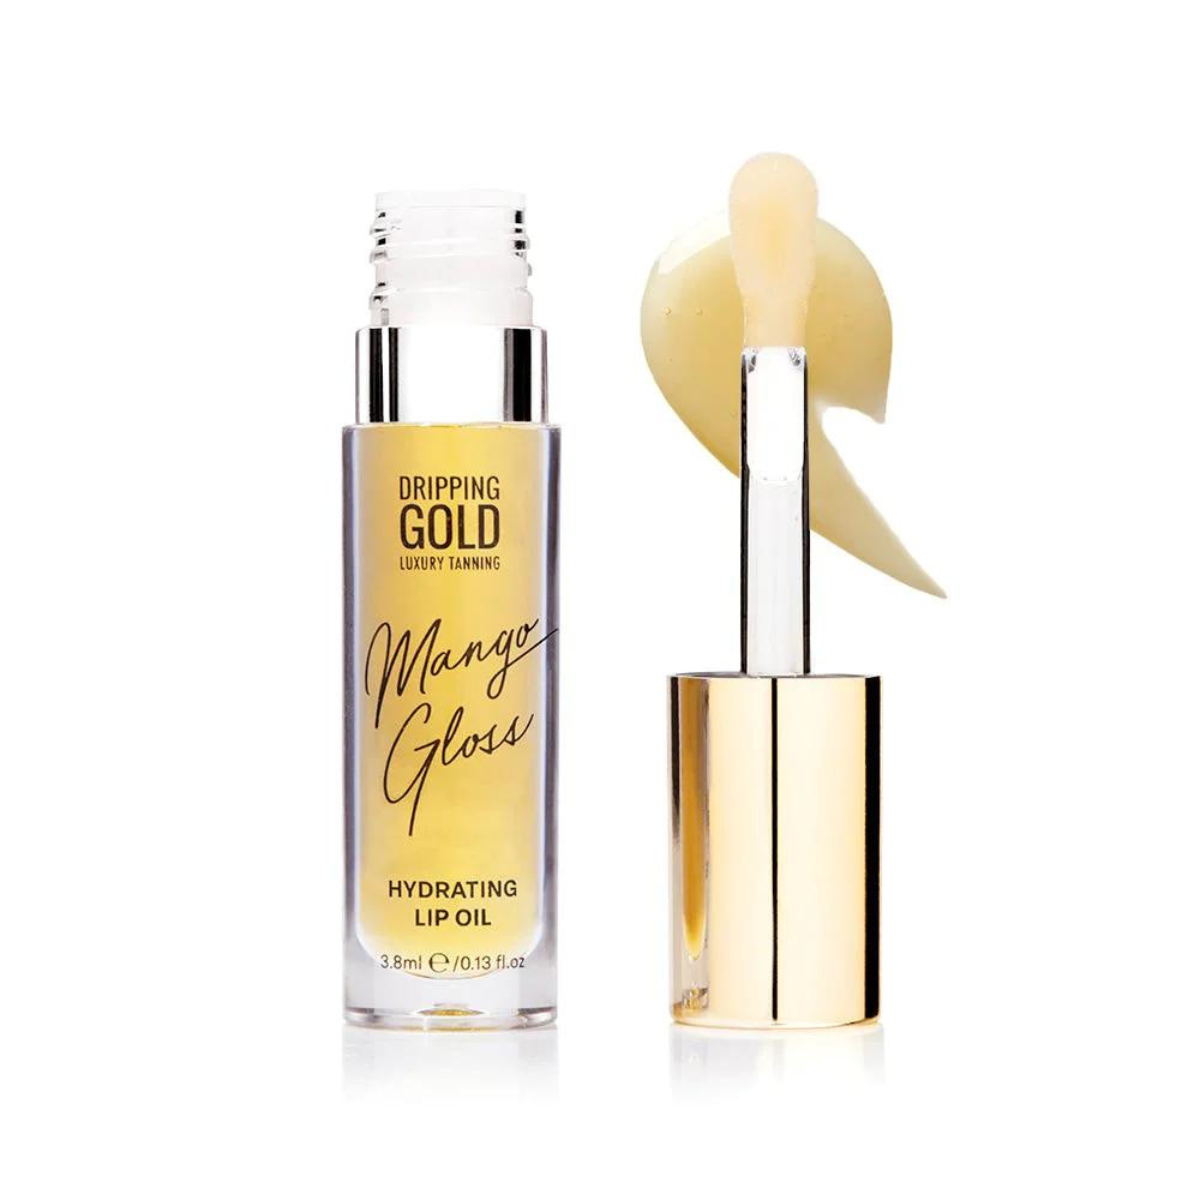 Dripping Gold Hydrating Lip Oil